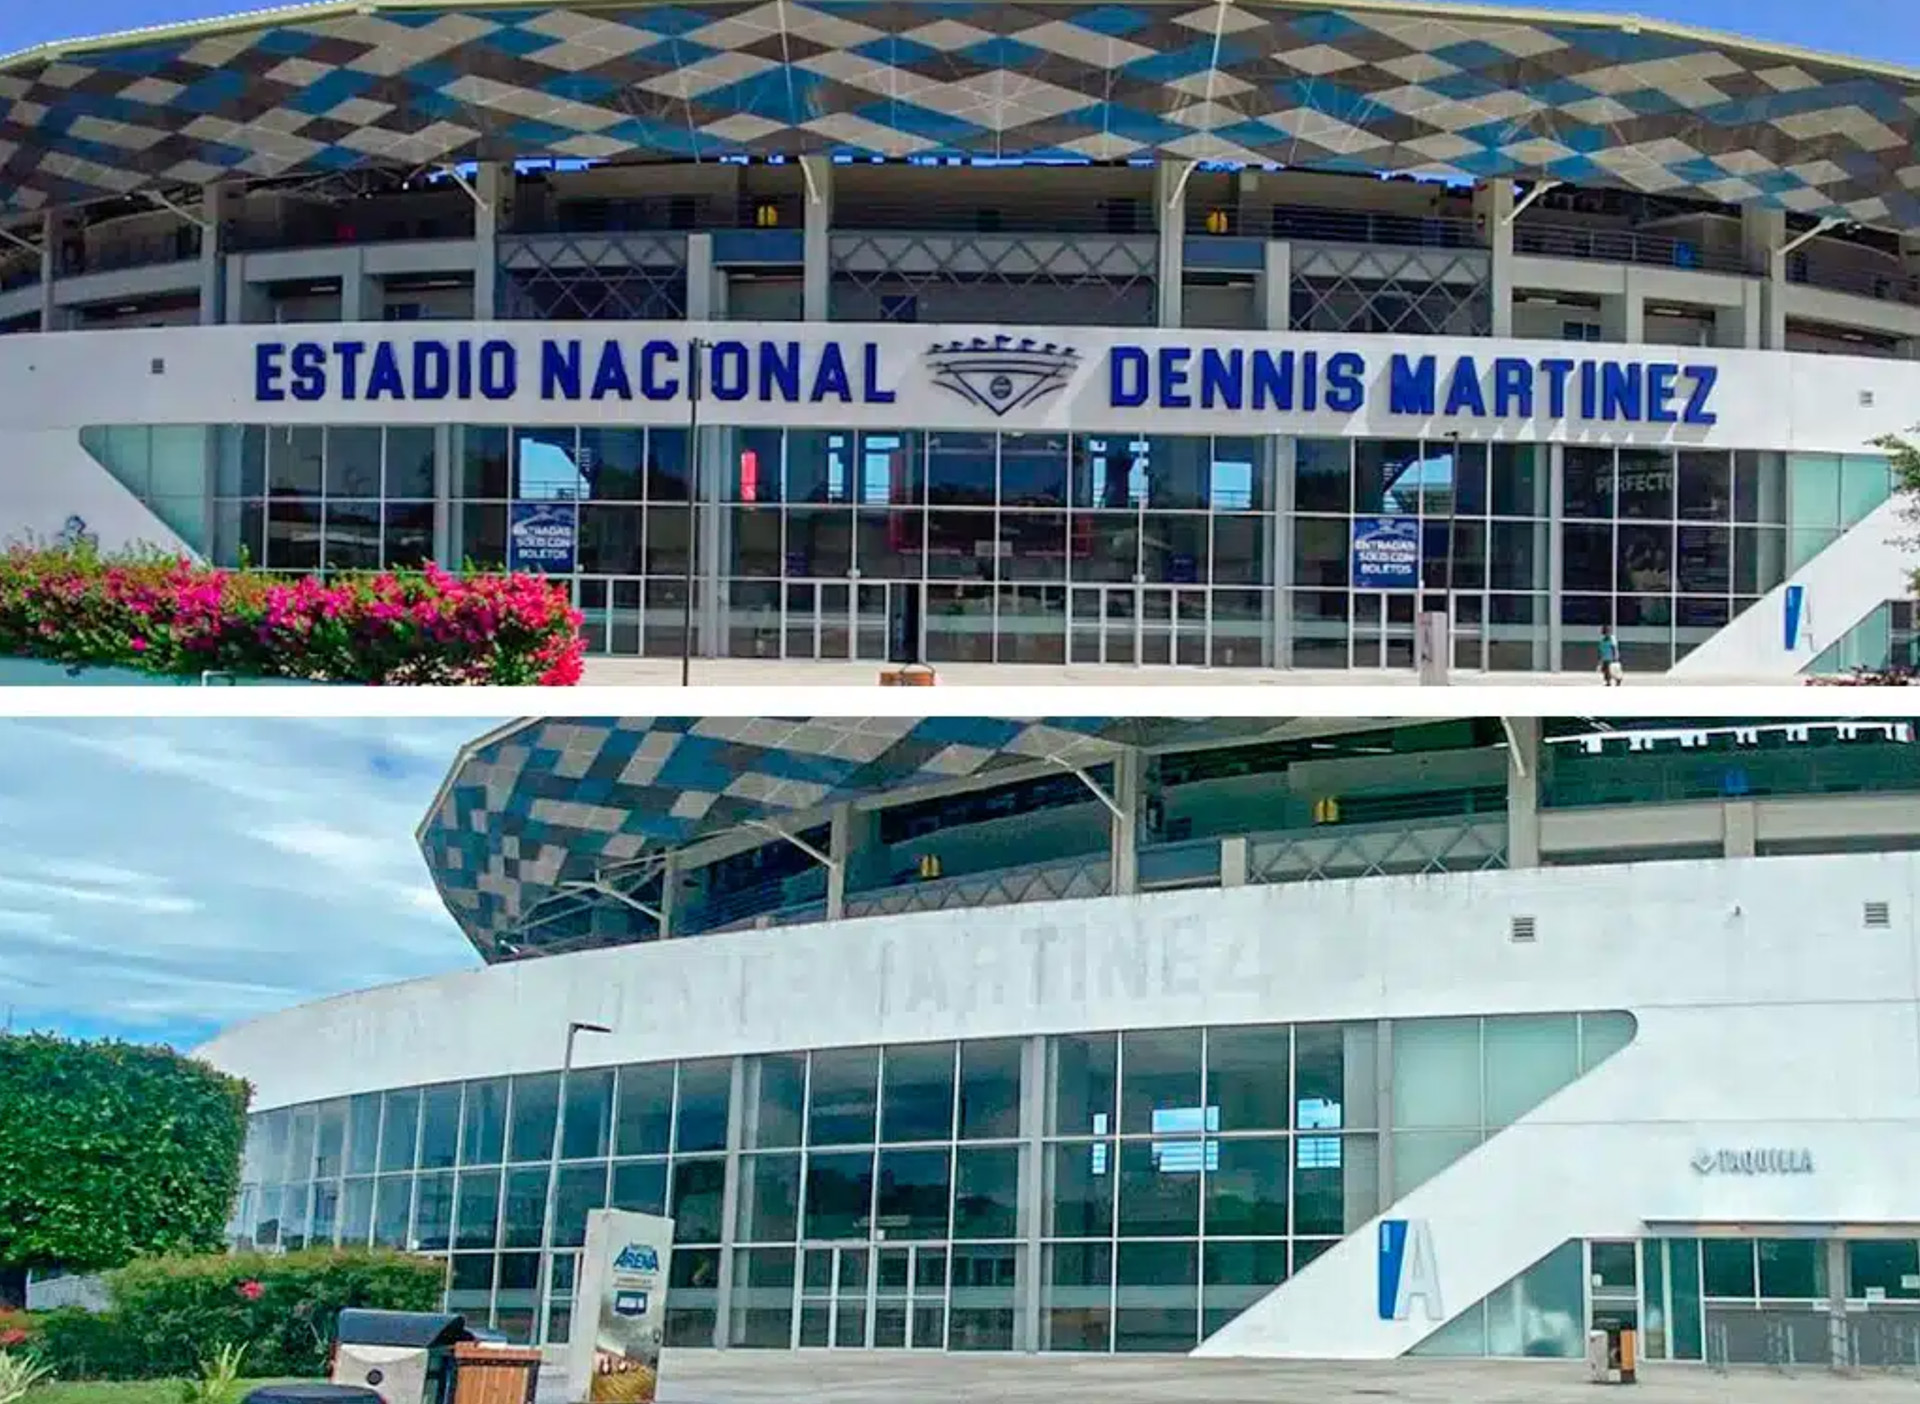 The letters that identified the stadium were erased and the name "Dennis Martinez National Stadium" disappeared from official communication.